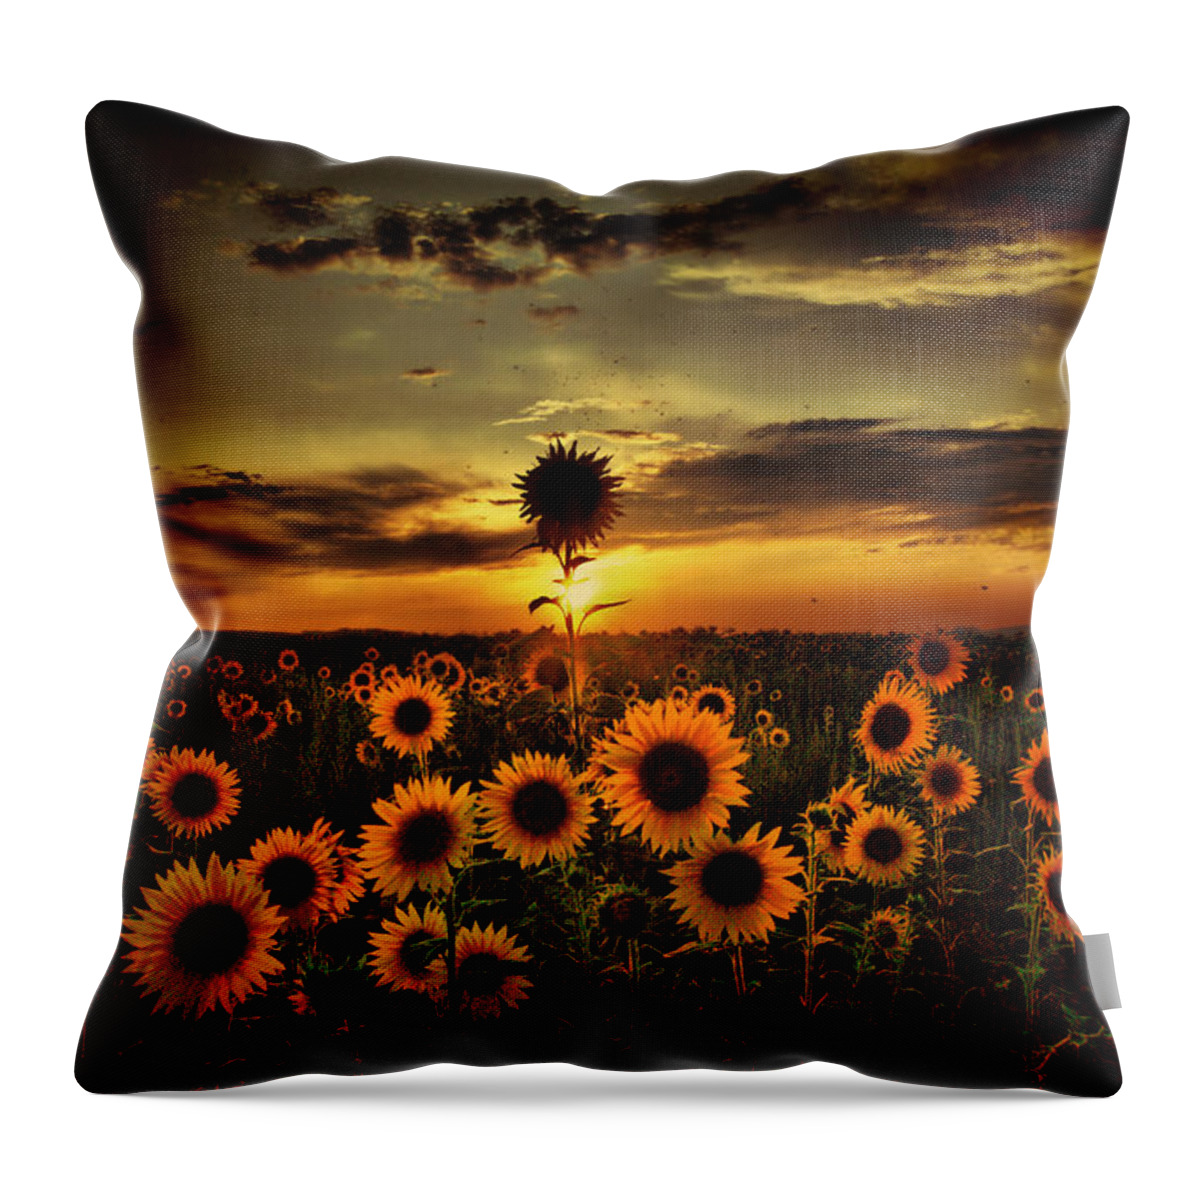 Tranquility Throw Pillow featuring the photograph Sunflowers At Dusk by Stehlibela-alias-scarbody